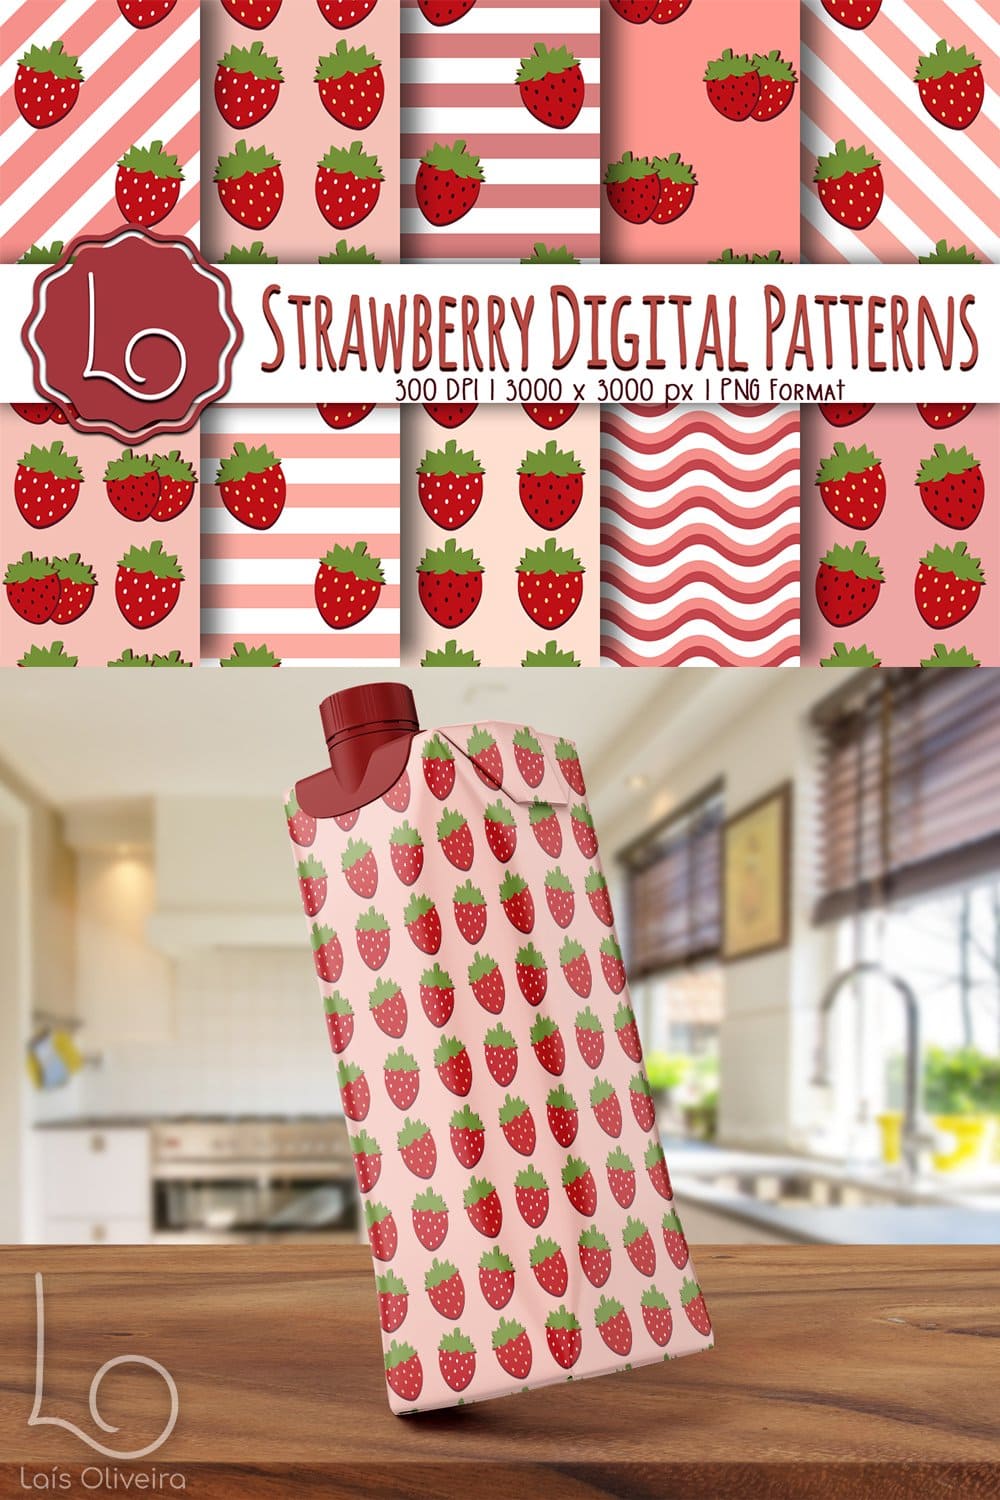 One of the examples of using the strawberry pattern.